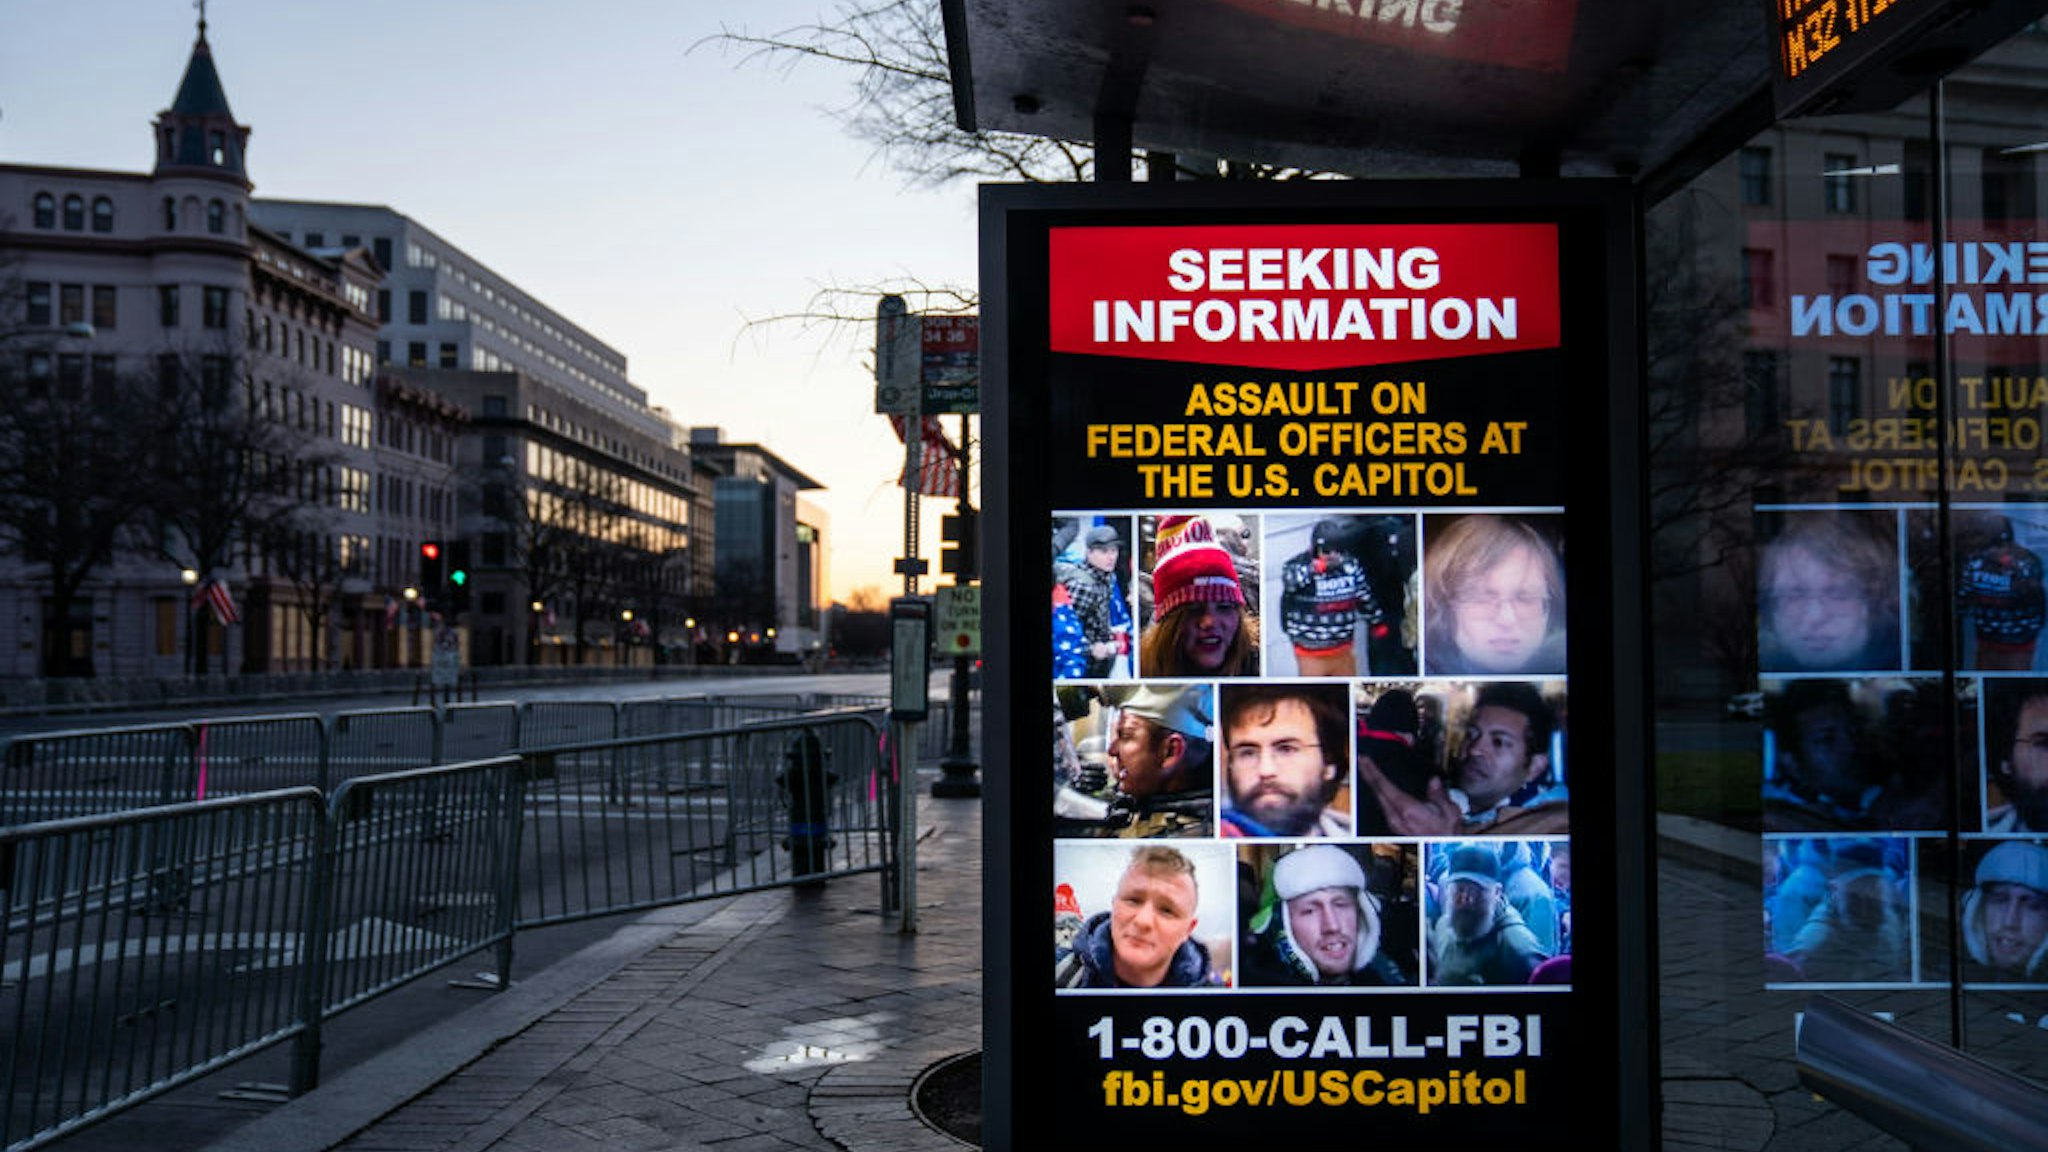 WASHINGTON, DC - JANUARY 16: A sign seeking information about people who breached the Capitol building is seen as the sun rises behind, seen from Pennsylvania Ave., which is within the secure area around downtown Washington DC on Saturday, Jan. 16, 2021 in Washington, DC. After last week's riots and security breach at the U.S. Capitol Building, the FBI has warned of additional threats in the nation's capital and across all 50 states.